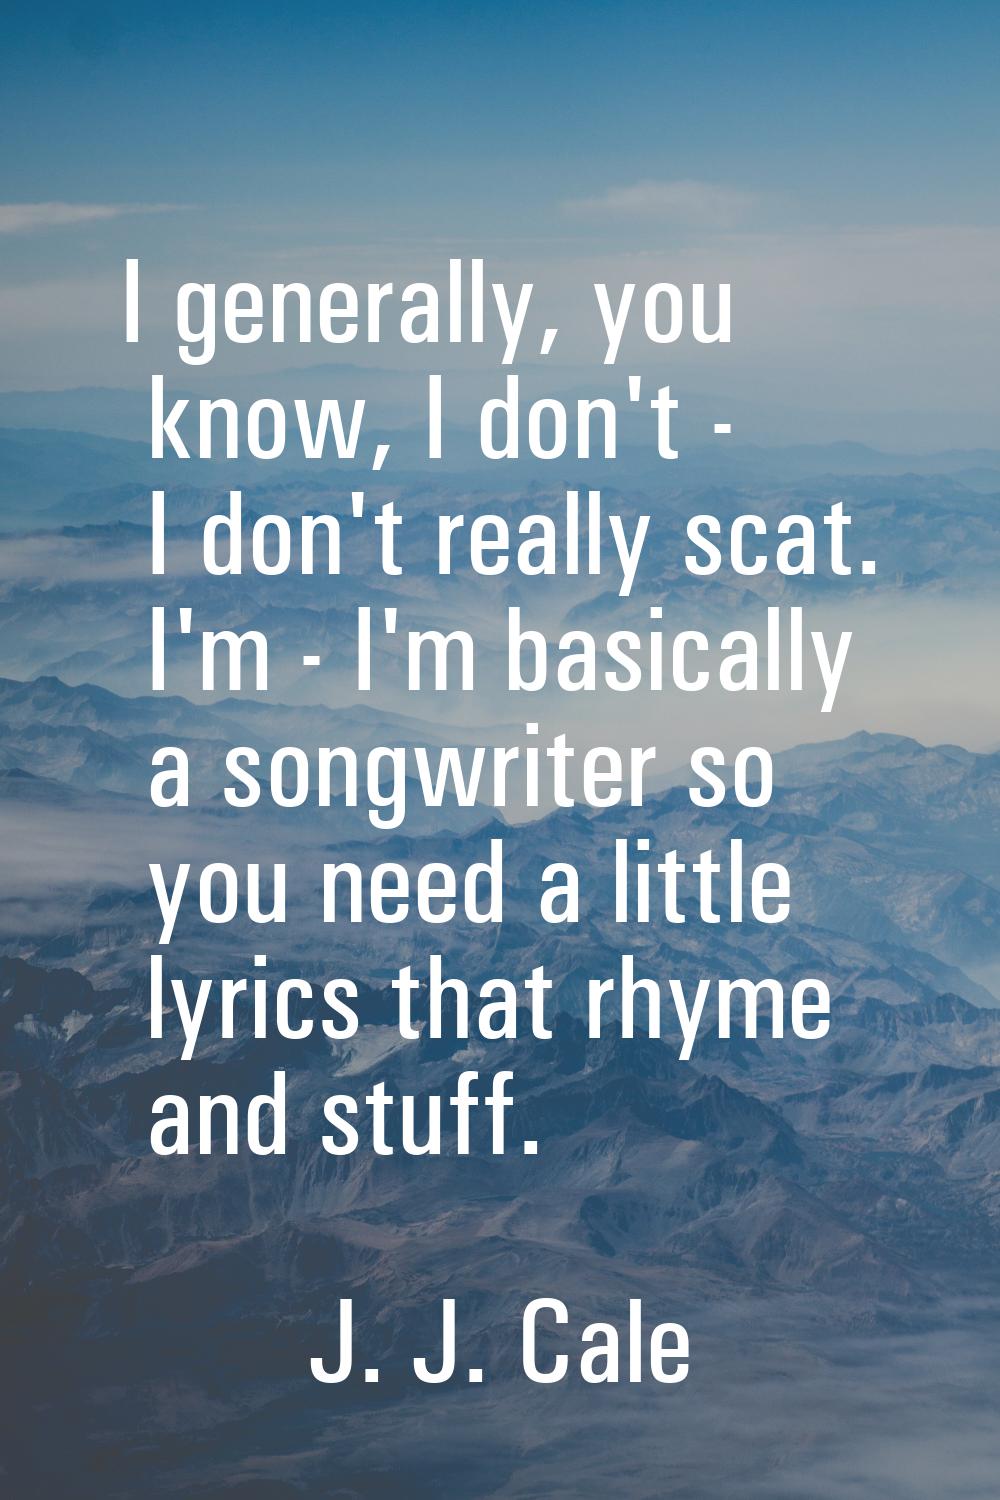 I generally, you know, I don't - I don't really scat. I'm - I'm basically a songwriter so you need 